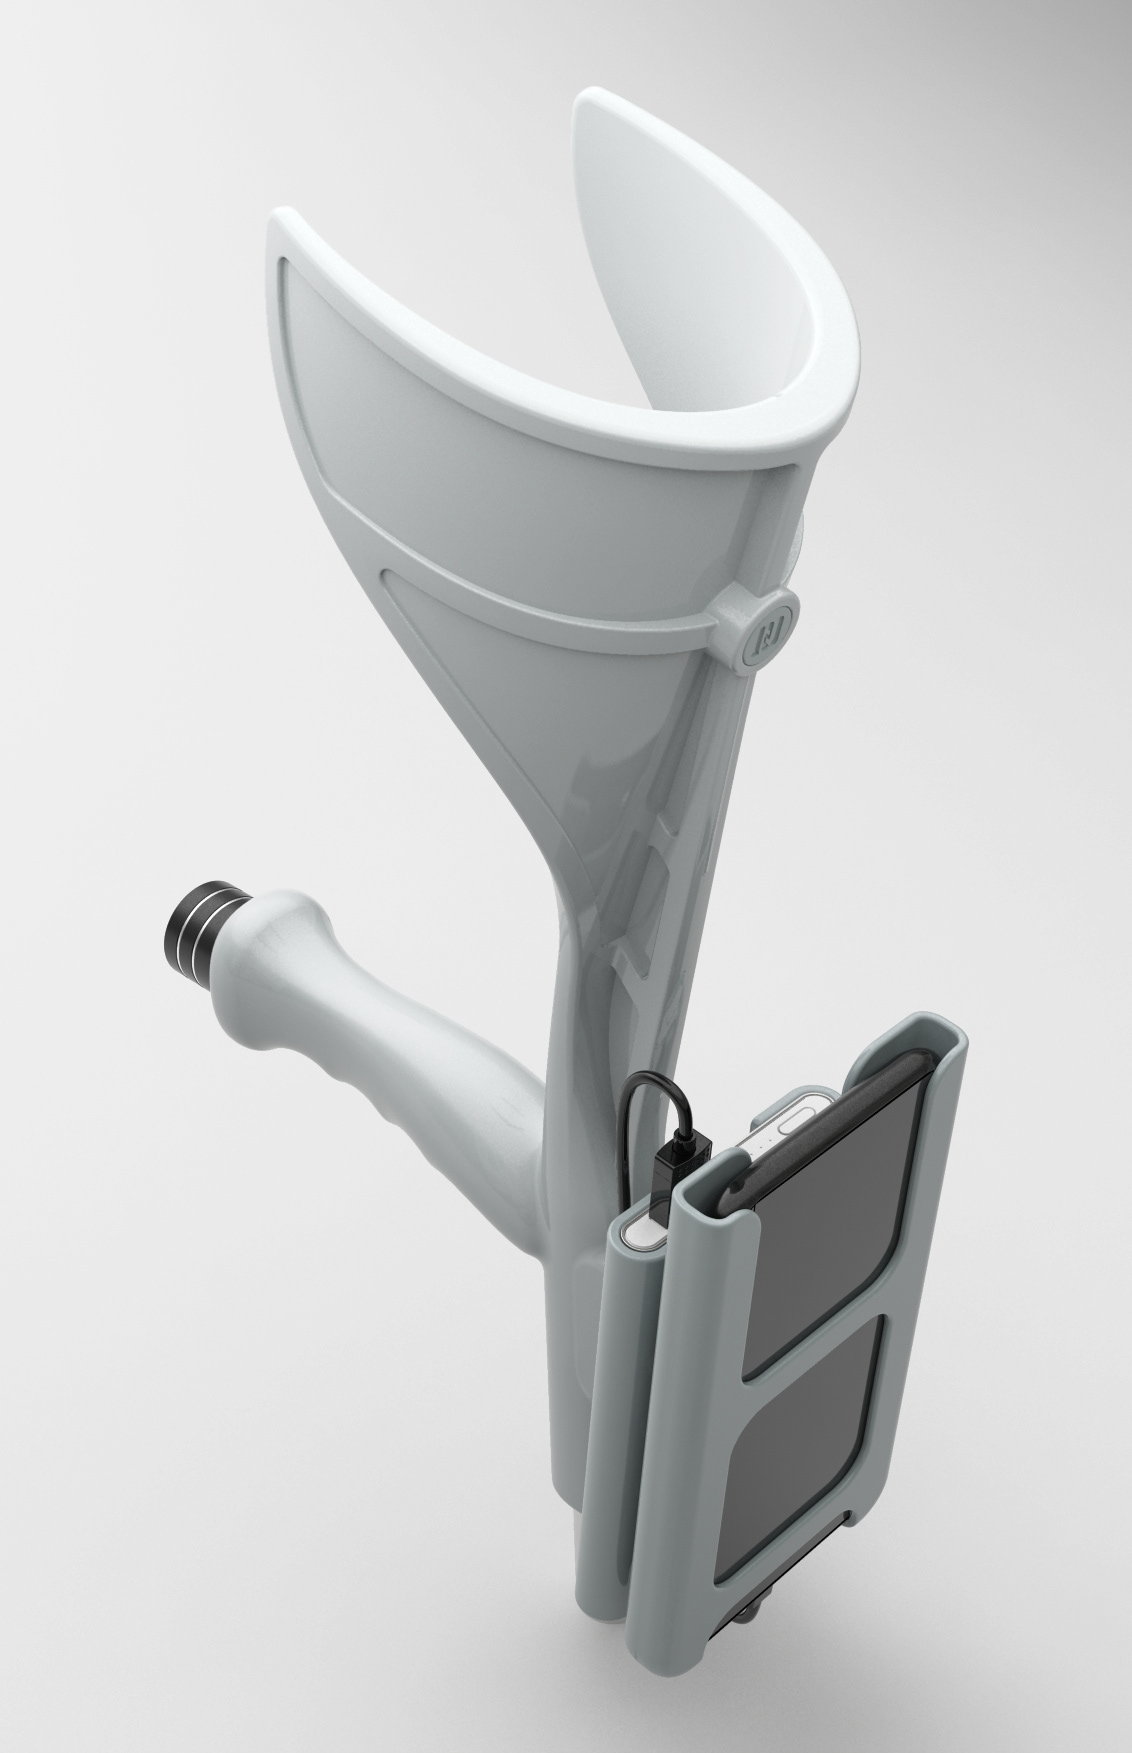 3D designing crutch fitness Health medical product modeling